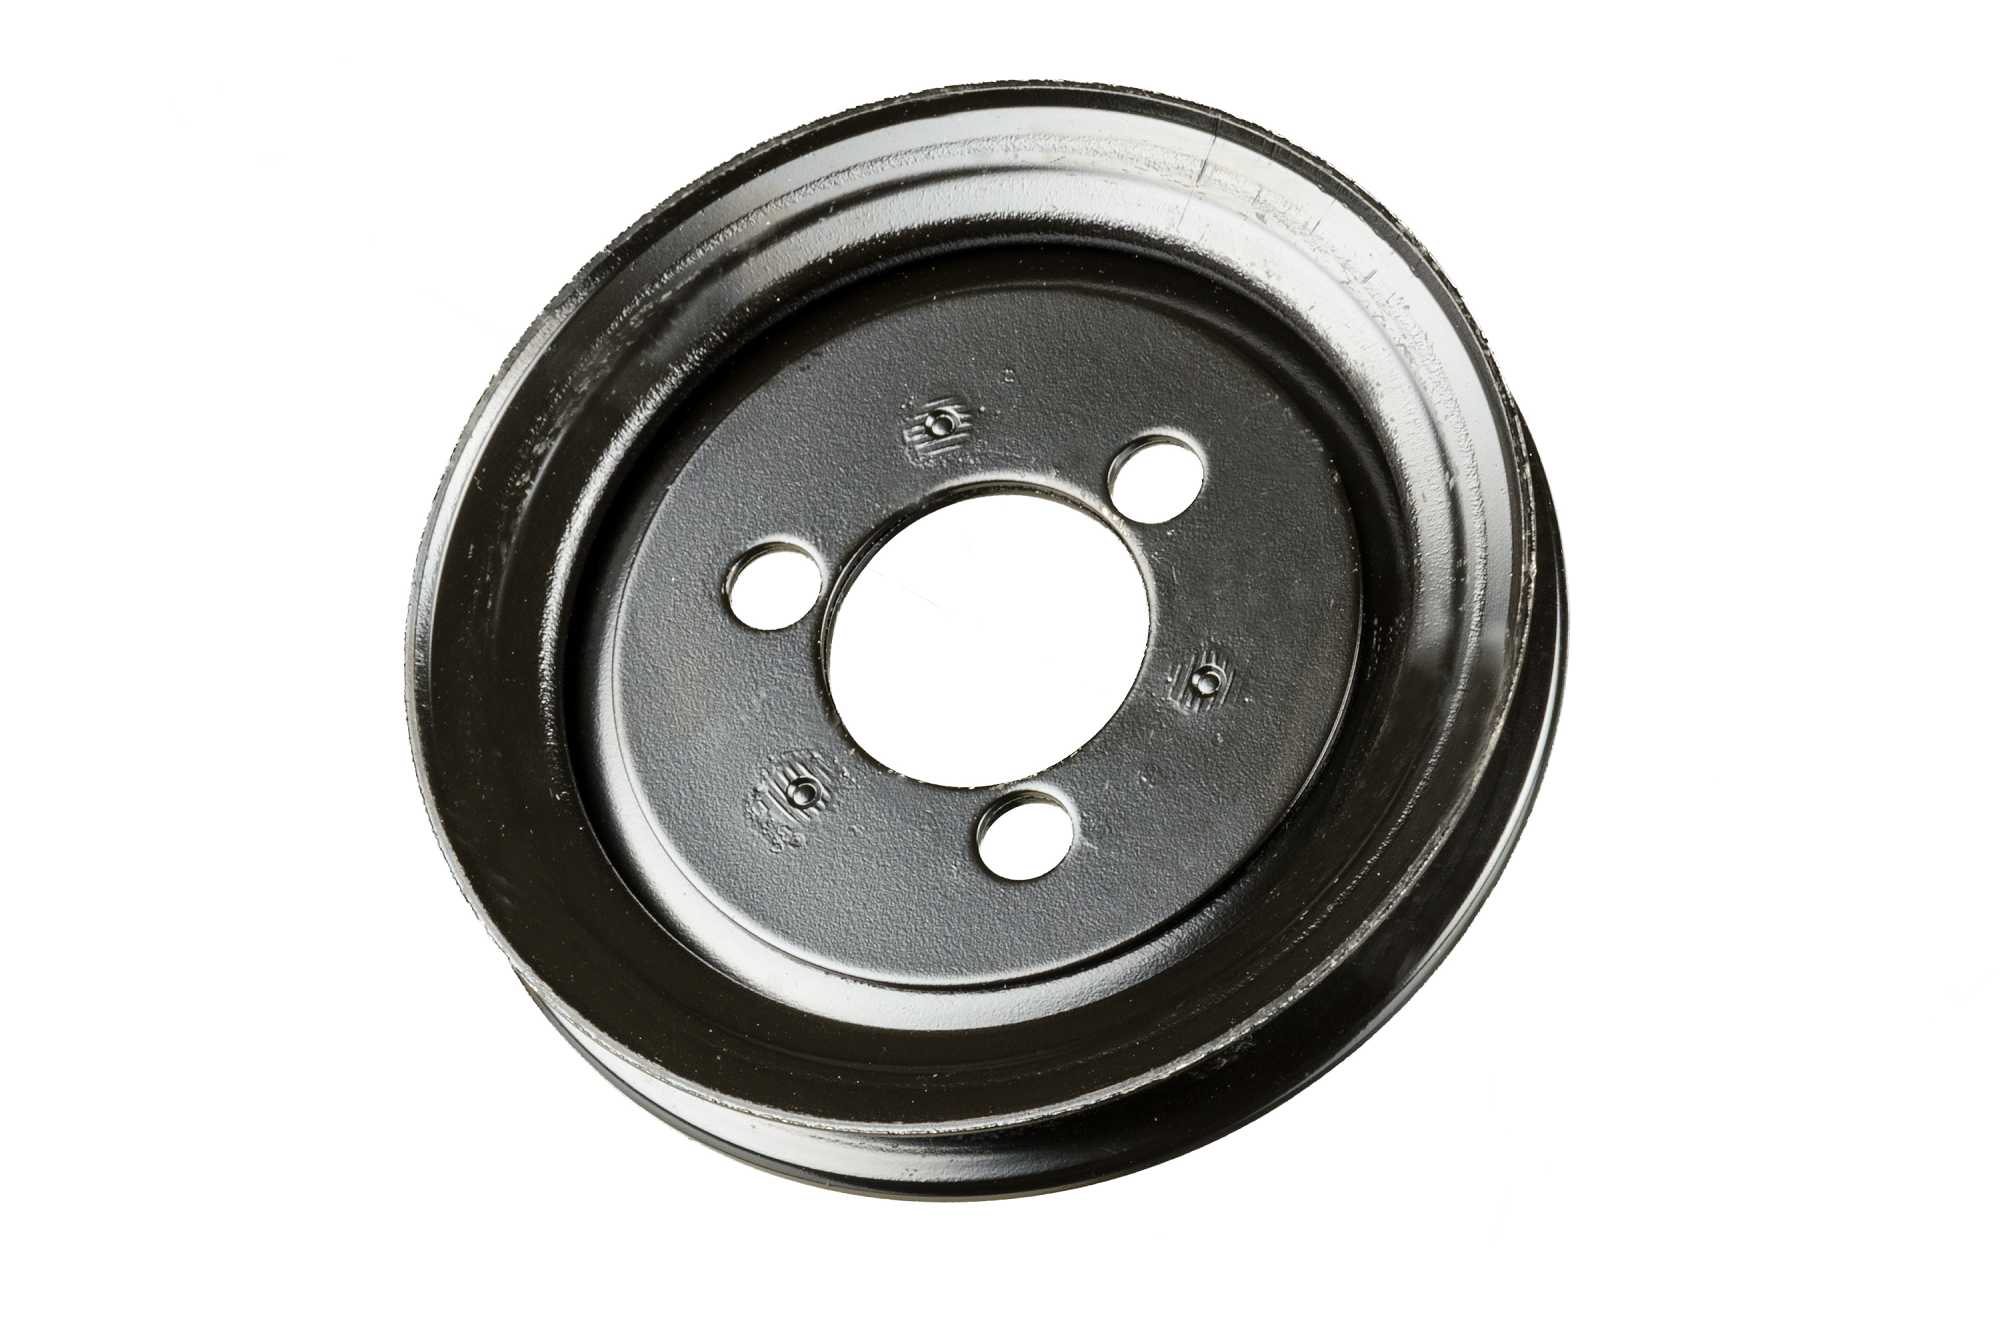 V-belt pulley for vehicles with power steering